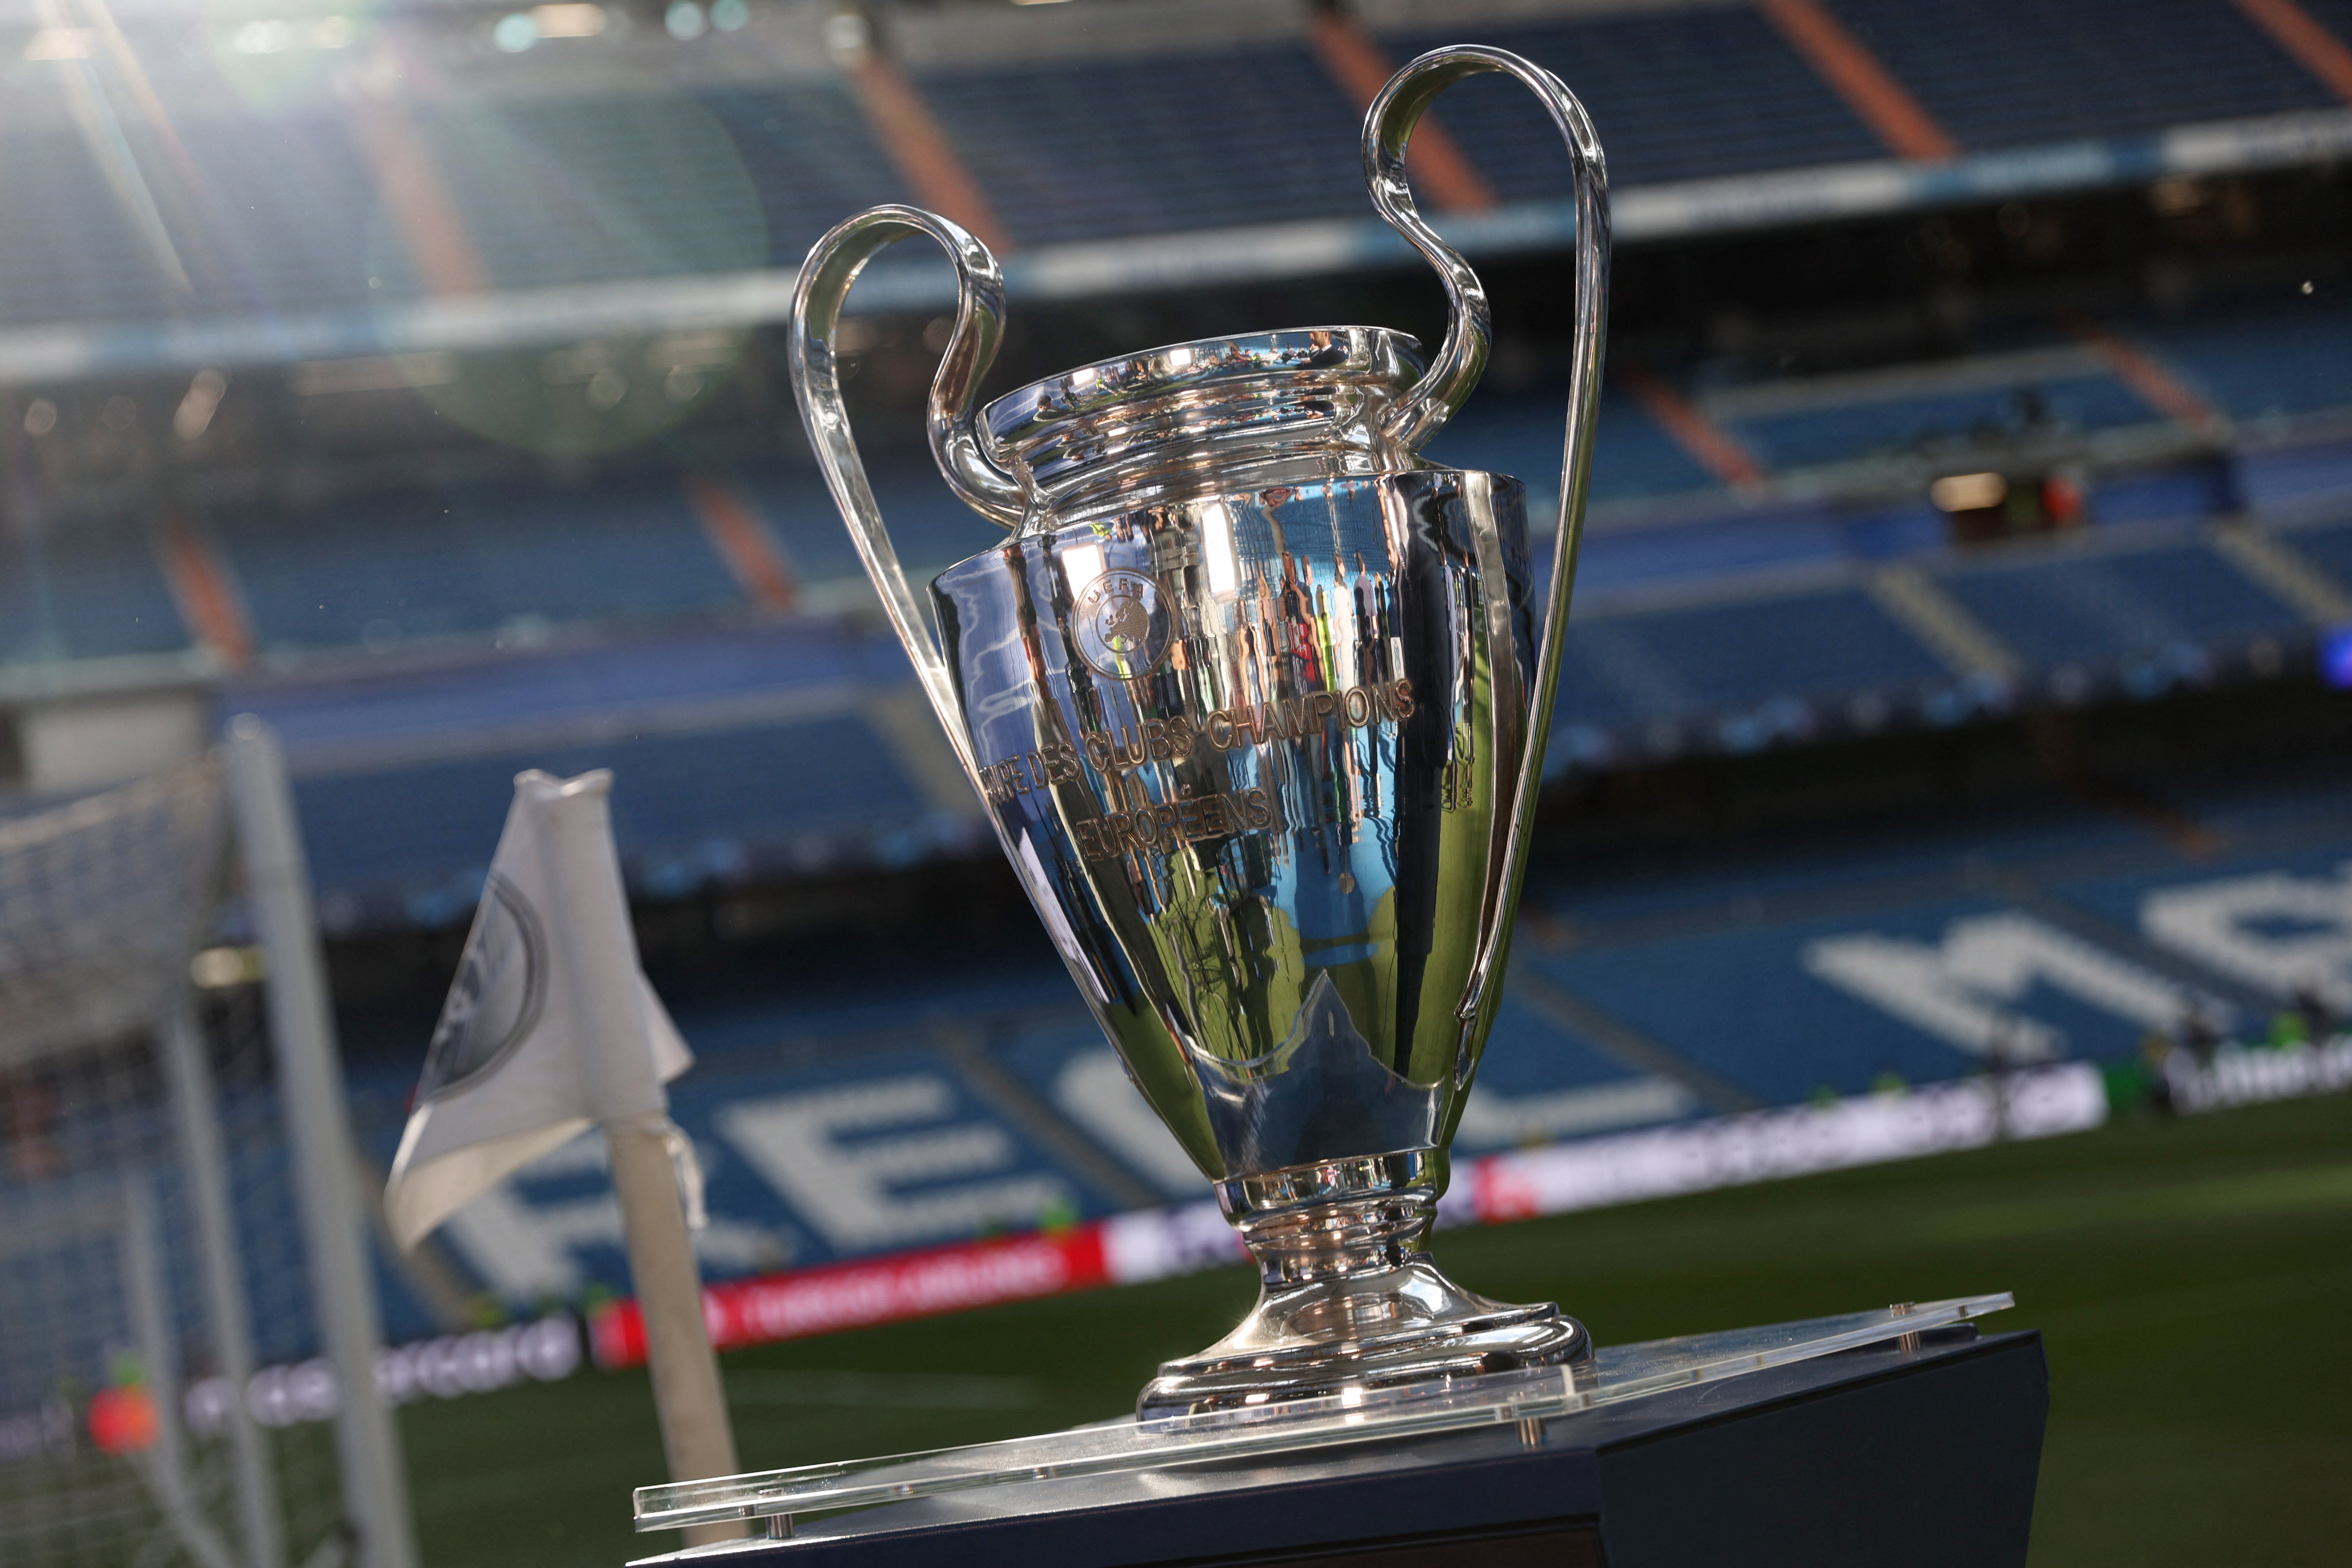 Uefa insist Champions League final will be held in Istanbul